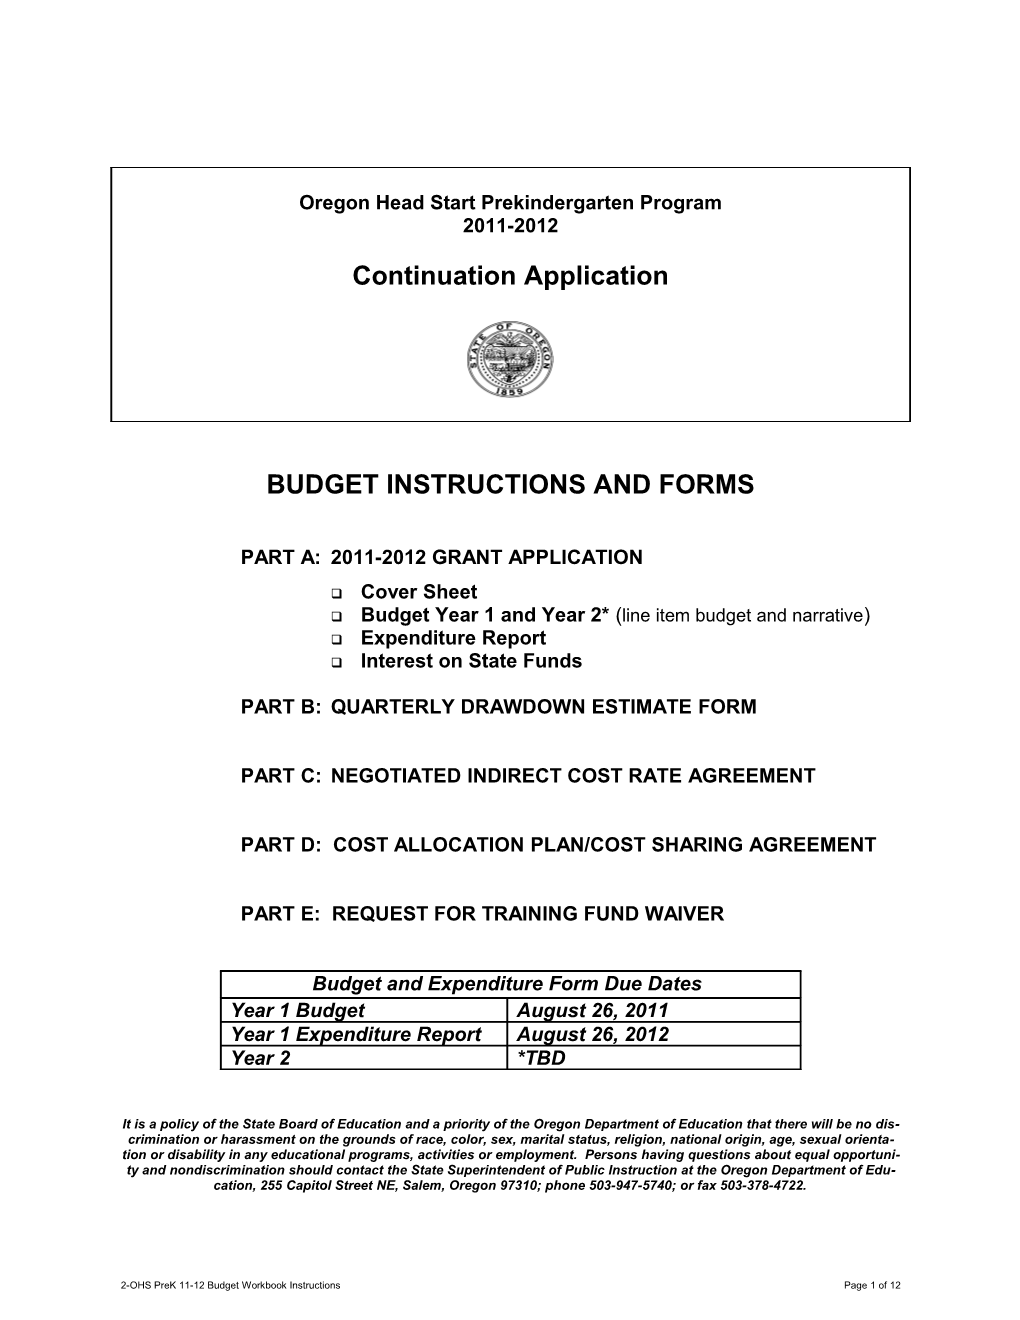 Budget Forms and Narrative Budget Justification